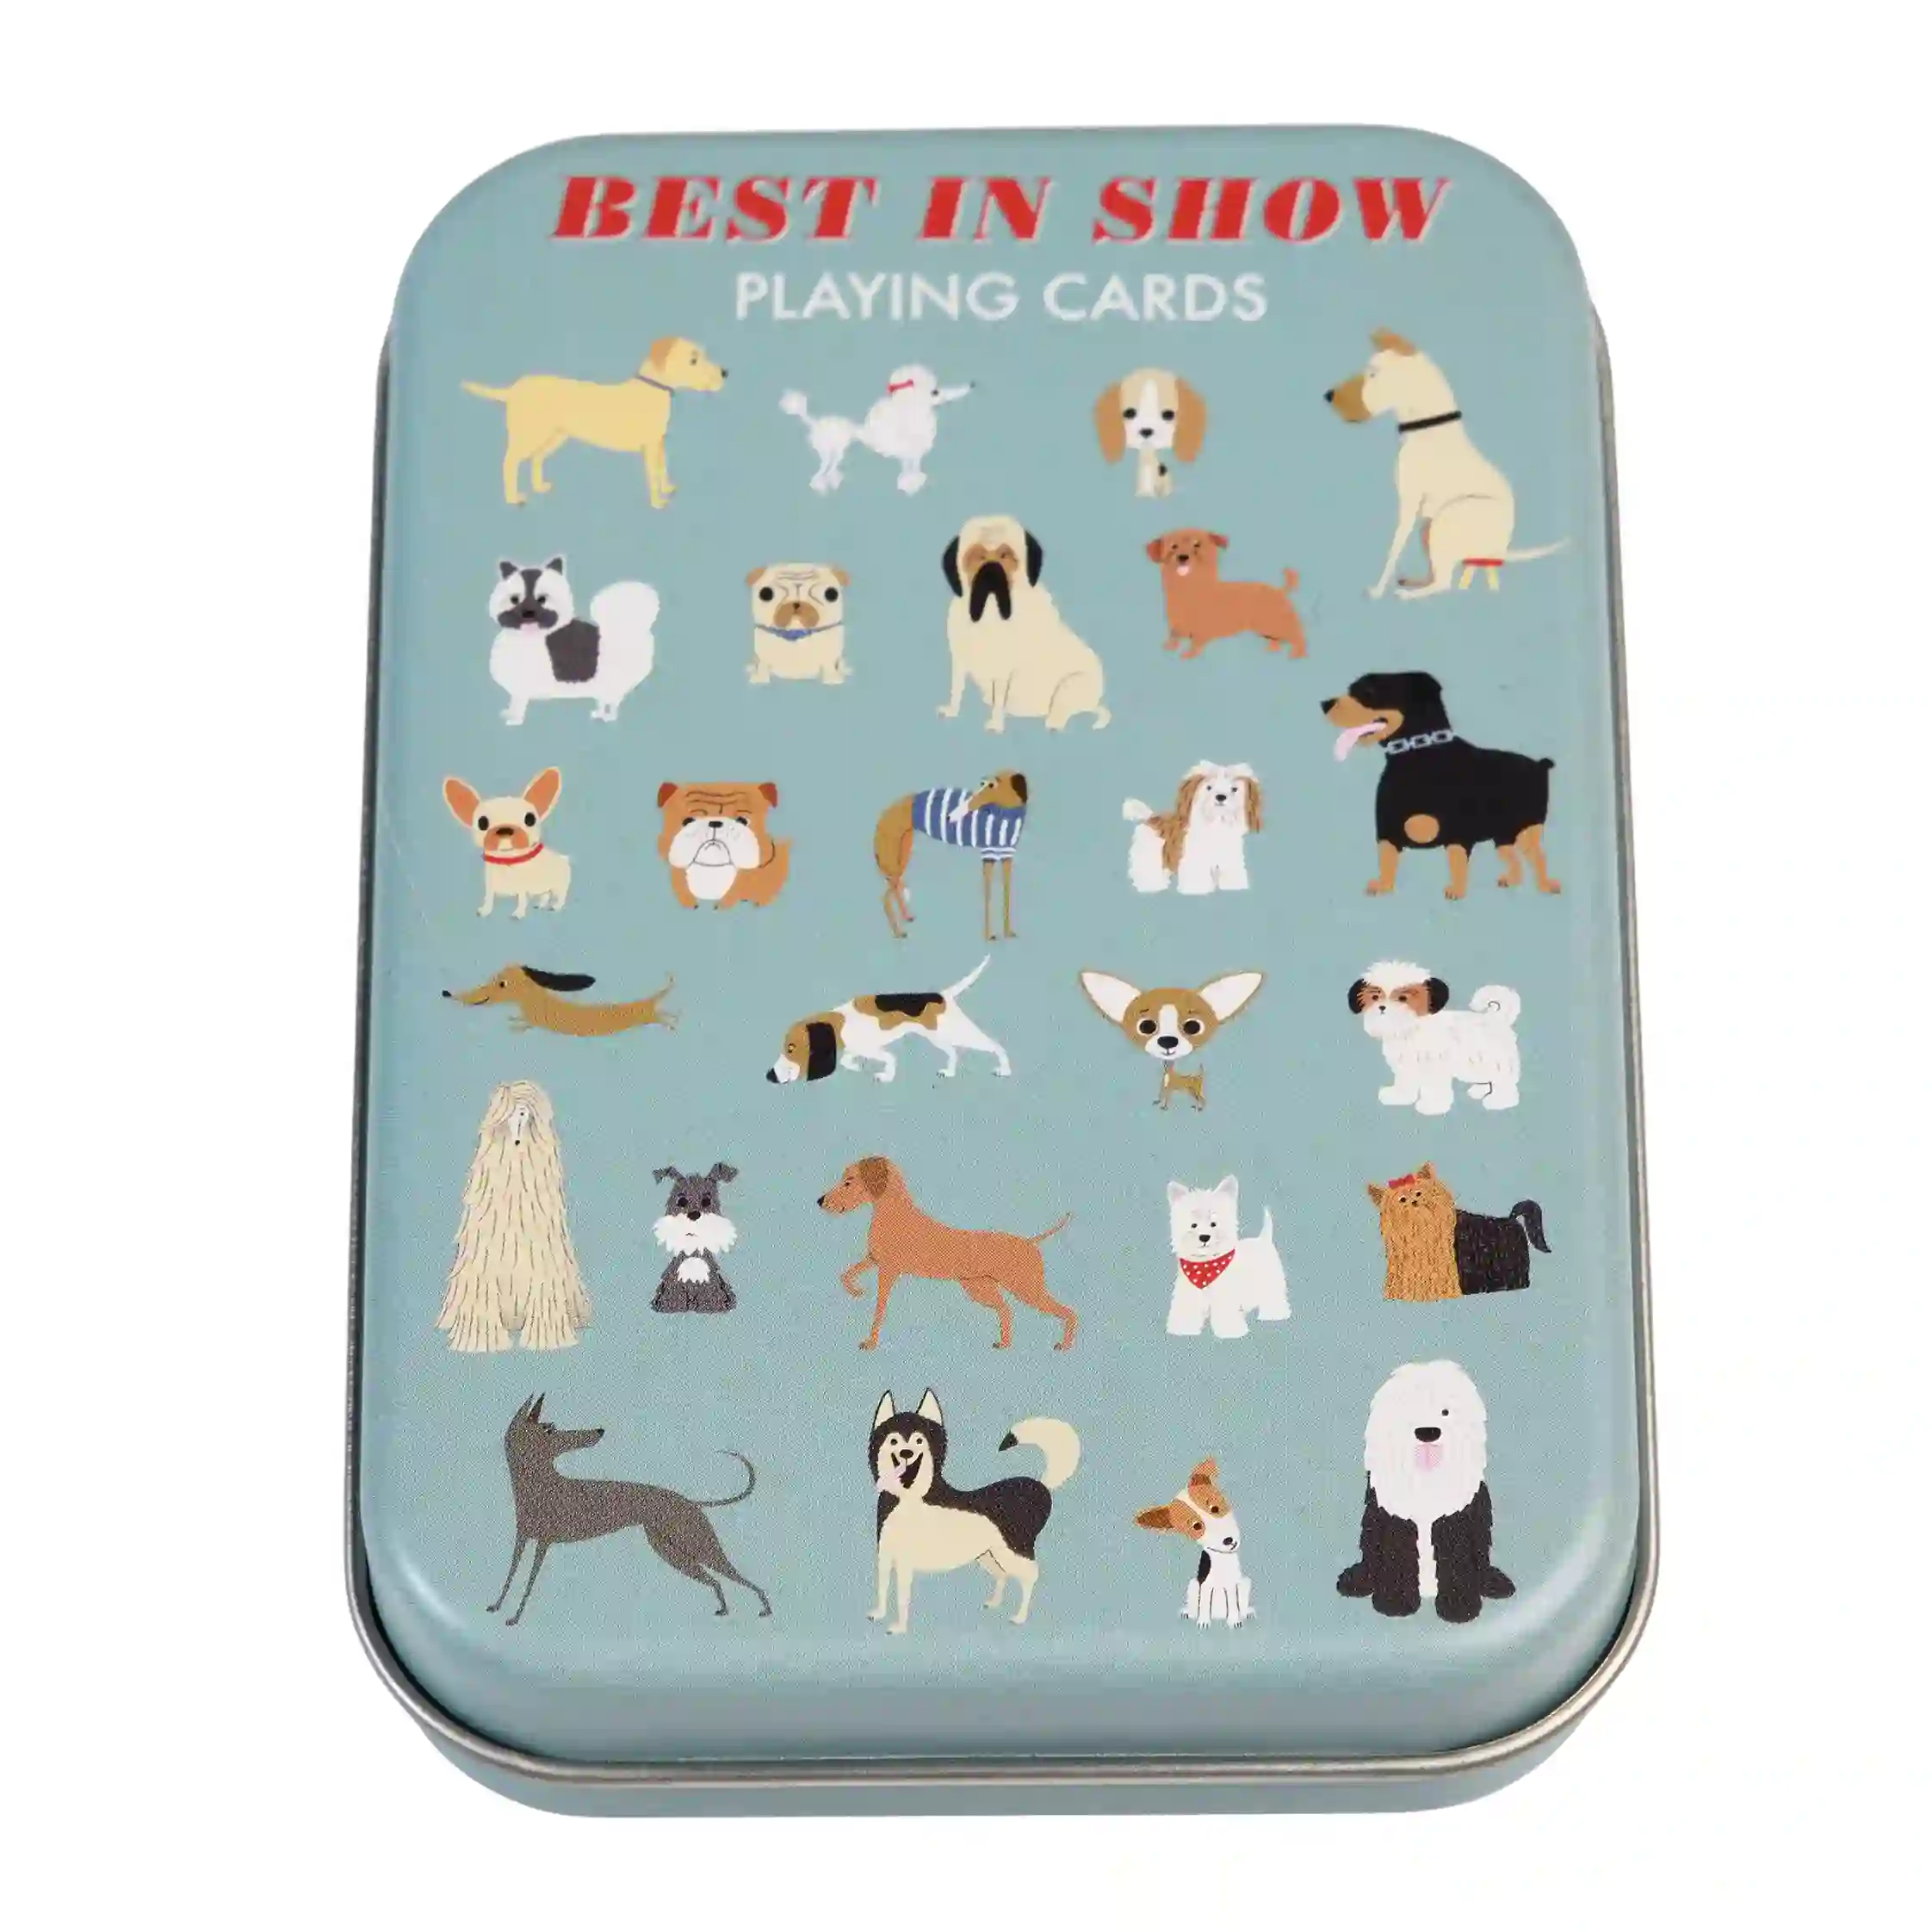 playing cards in a tin - best in show